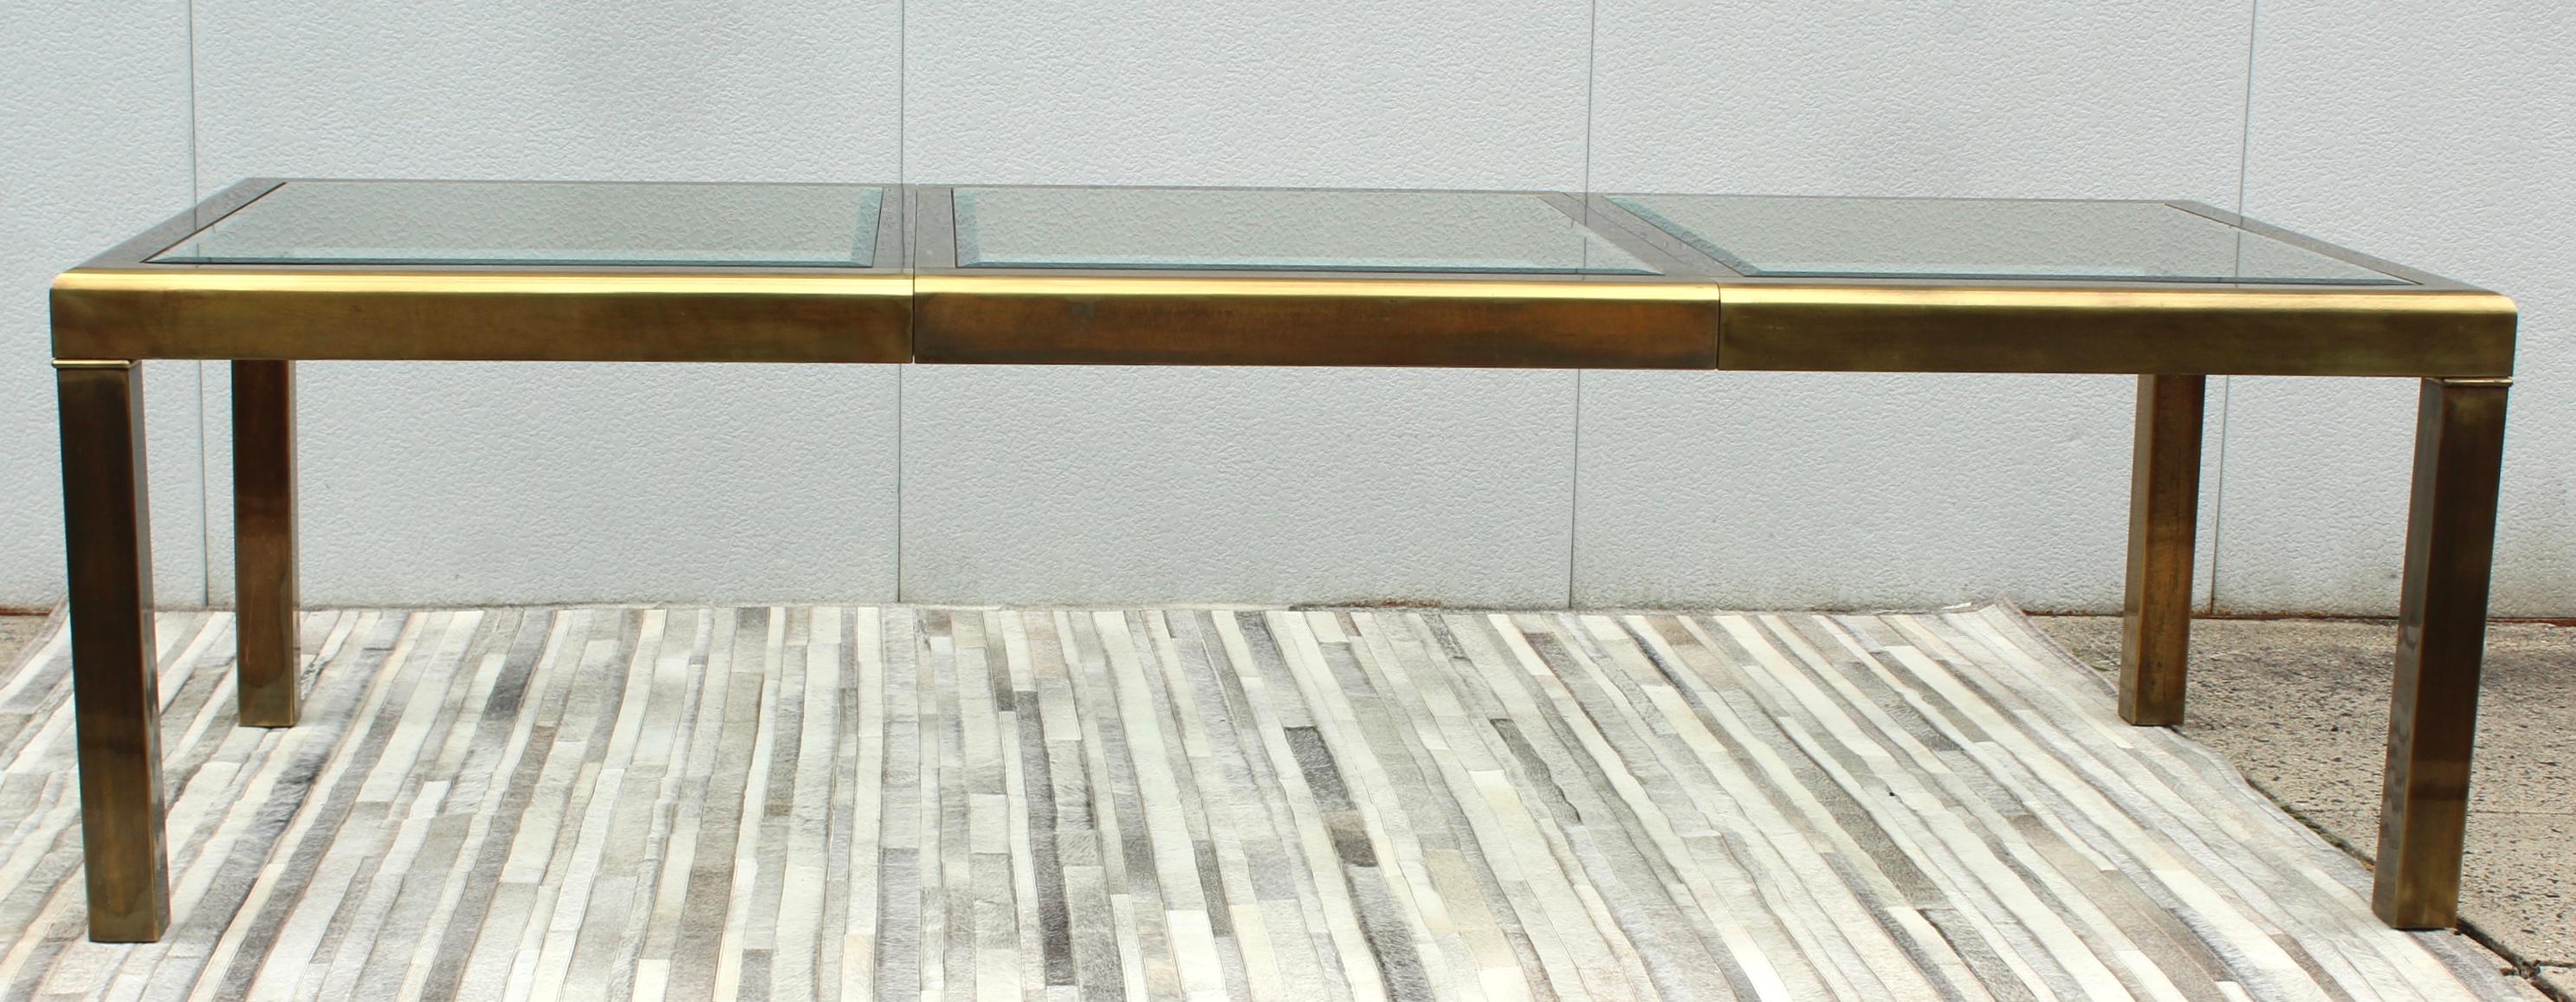 Stunning 1970's Mid-Century Modern brass dining table with beveled glass inserts and leaf, in vintage original condition with some wear and patina due to age and use, there is some wear to the brass on the leaf and legs.

Length without the leaf